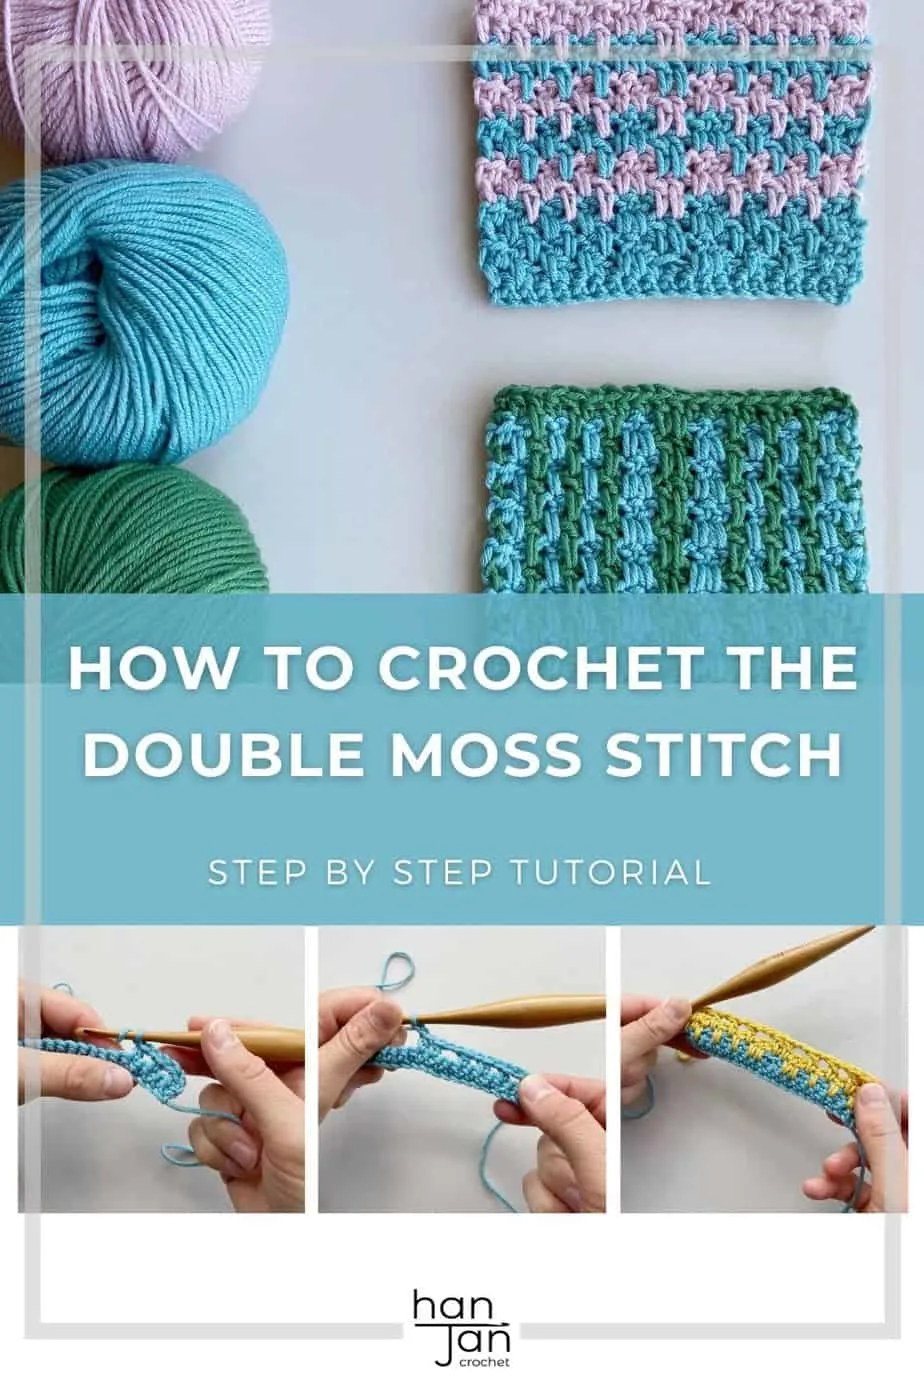 image showing step by step process of double crochet moss stitch